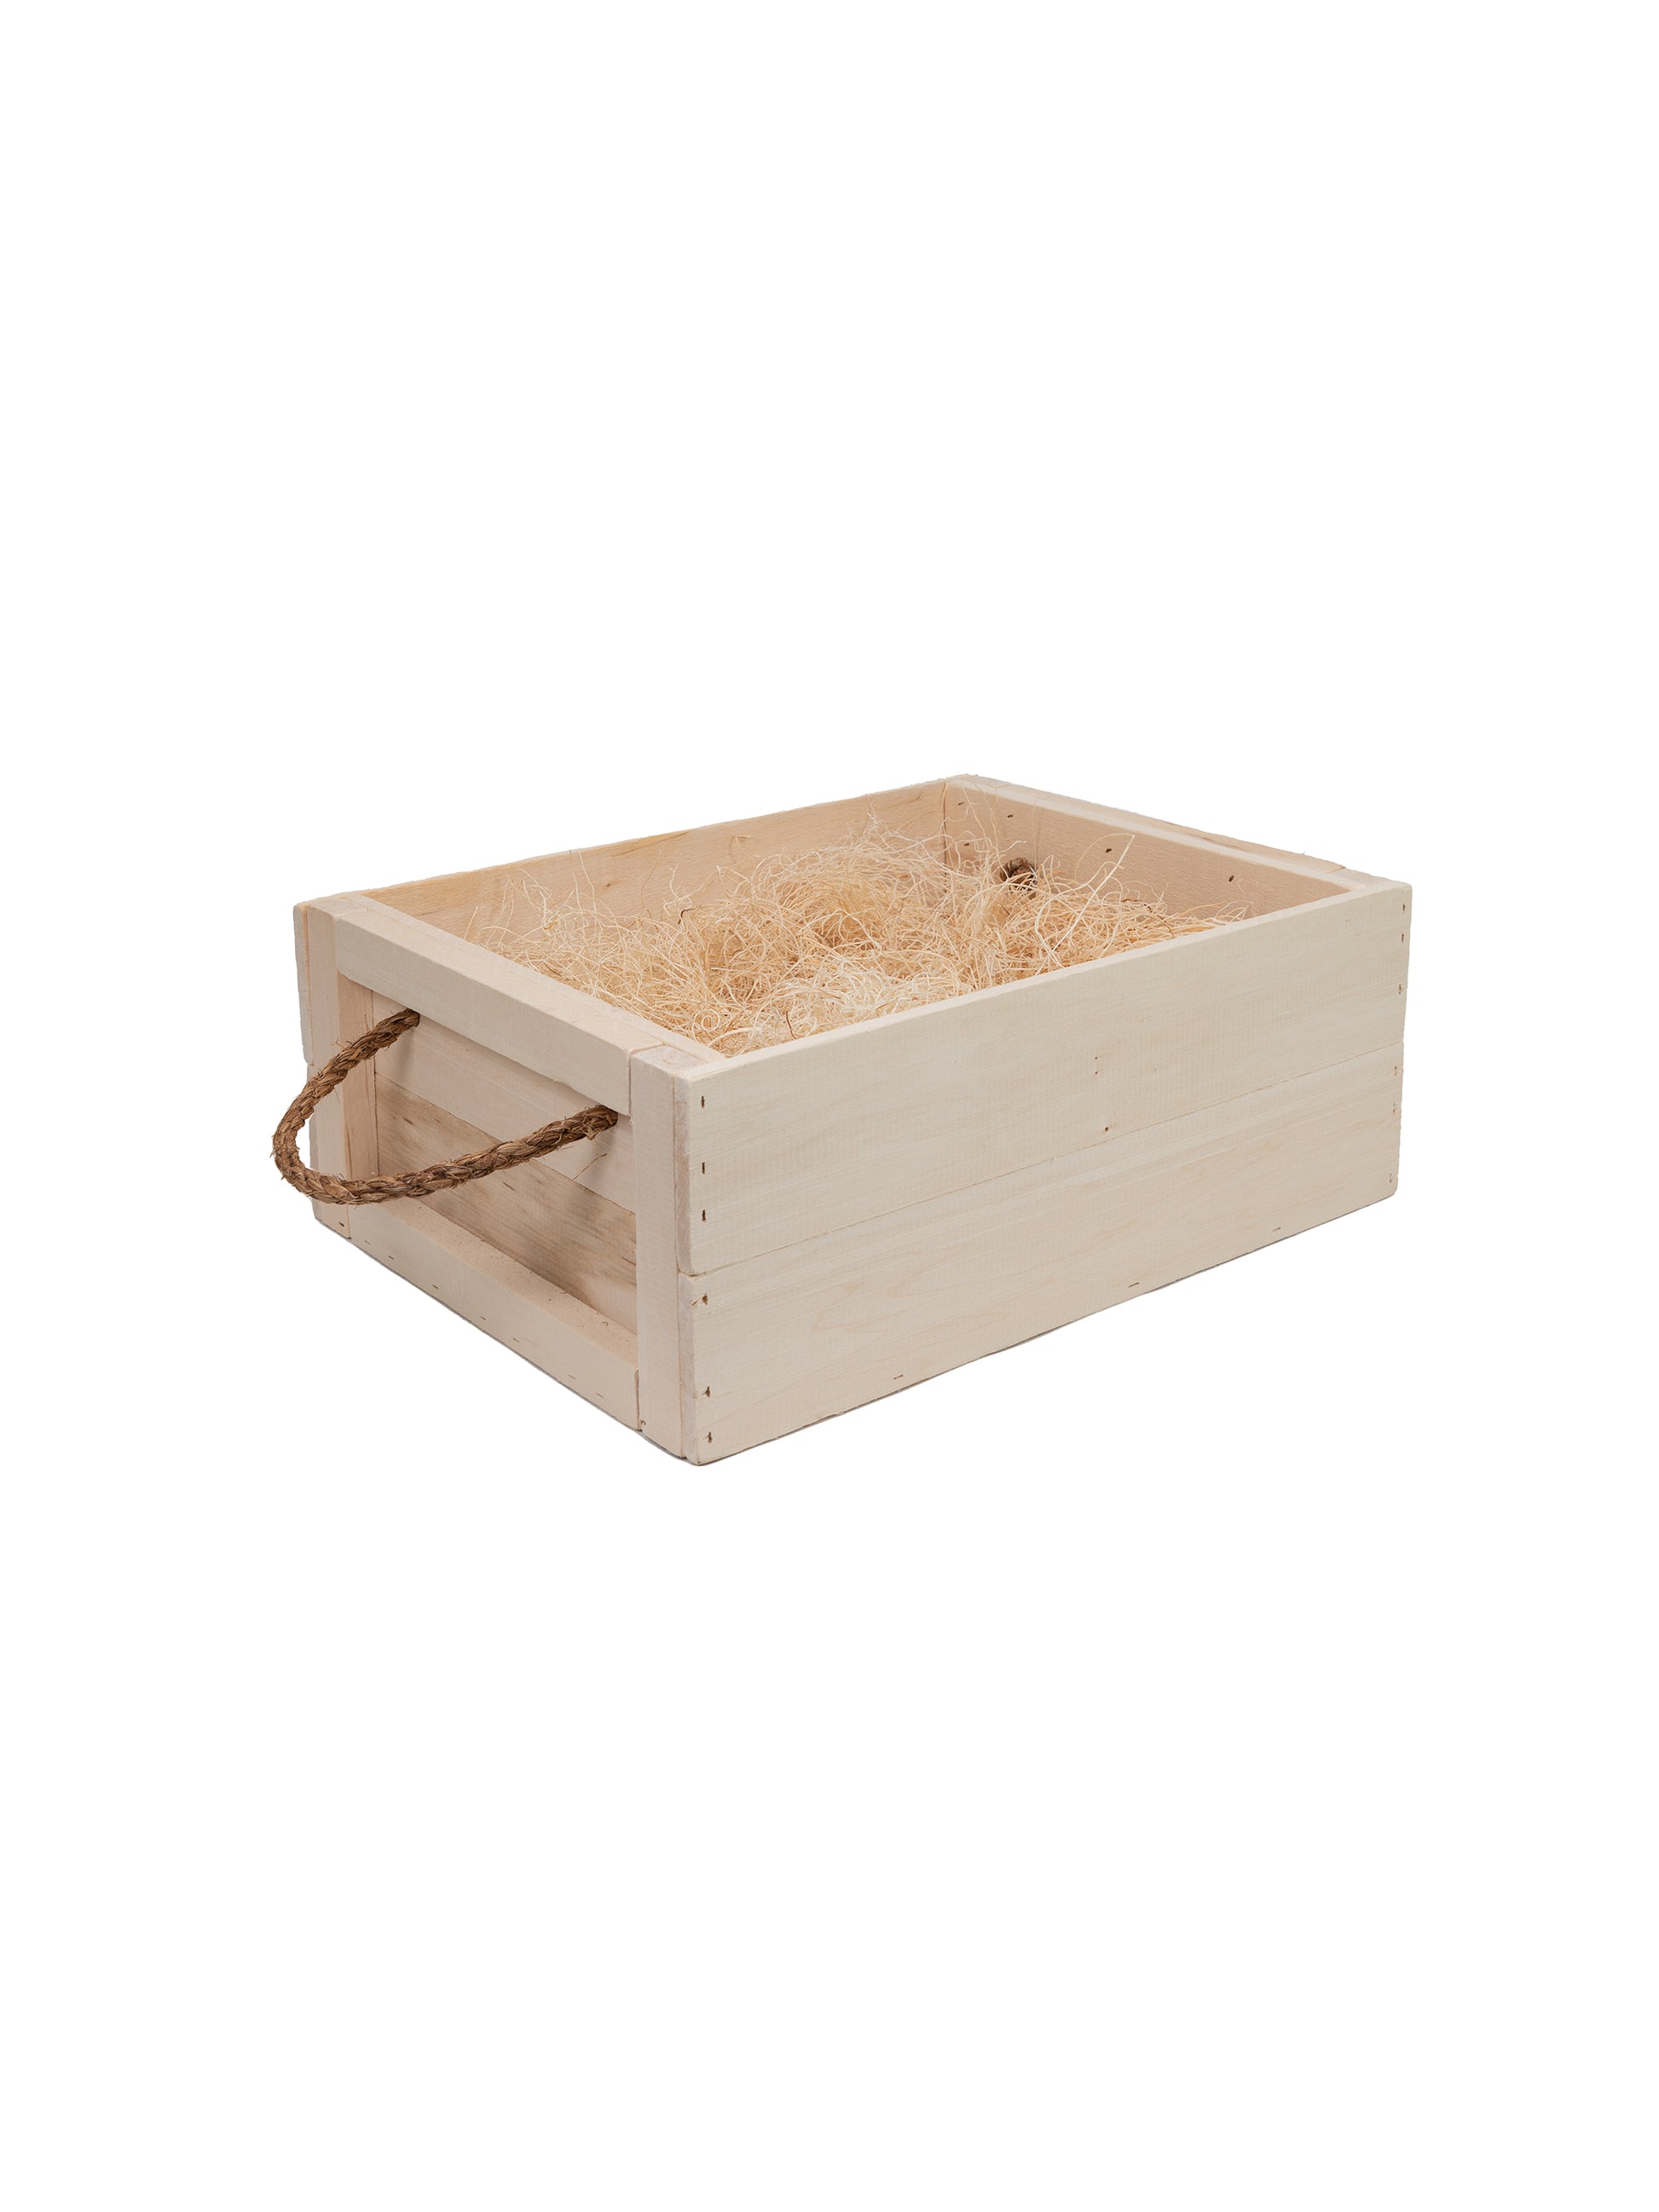 Shop the Wooden Keepsake Gift Crate with Rope Handles at Weston Table